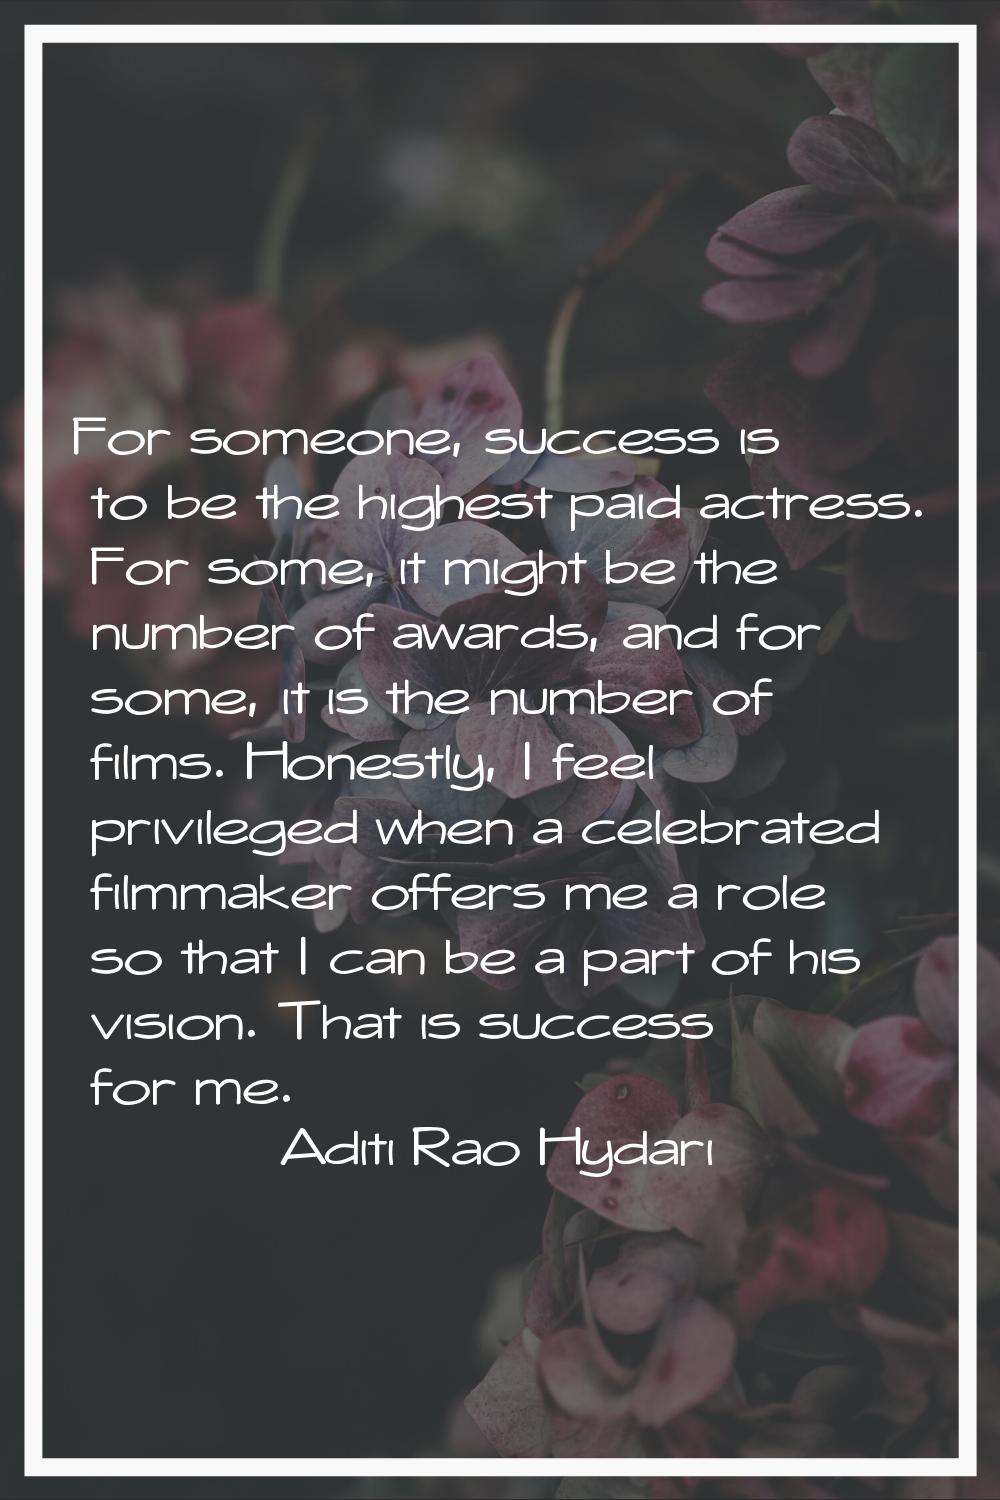 For someone, success is to be the highest paid actress. For some, it might be the number of awards,